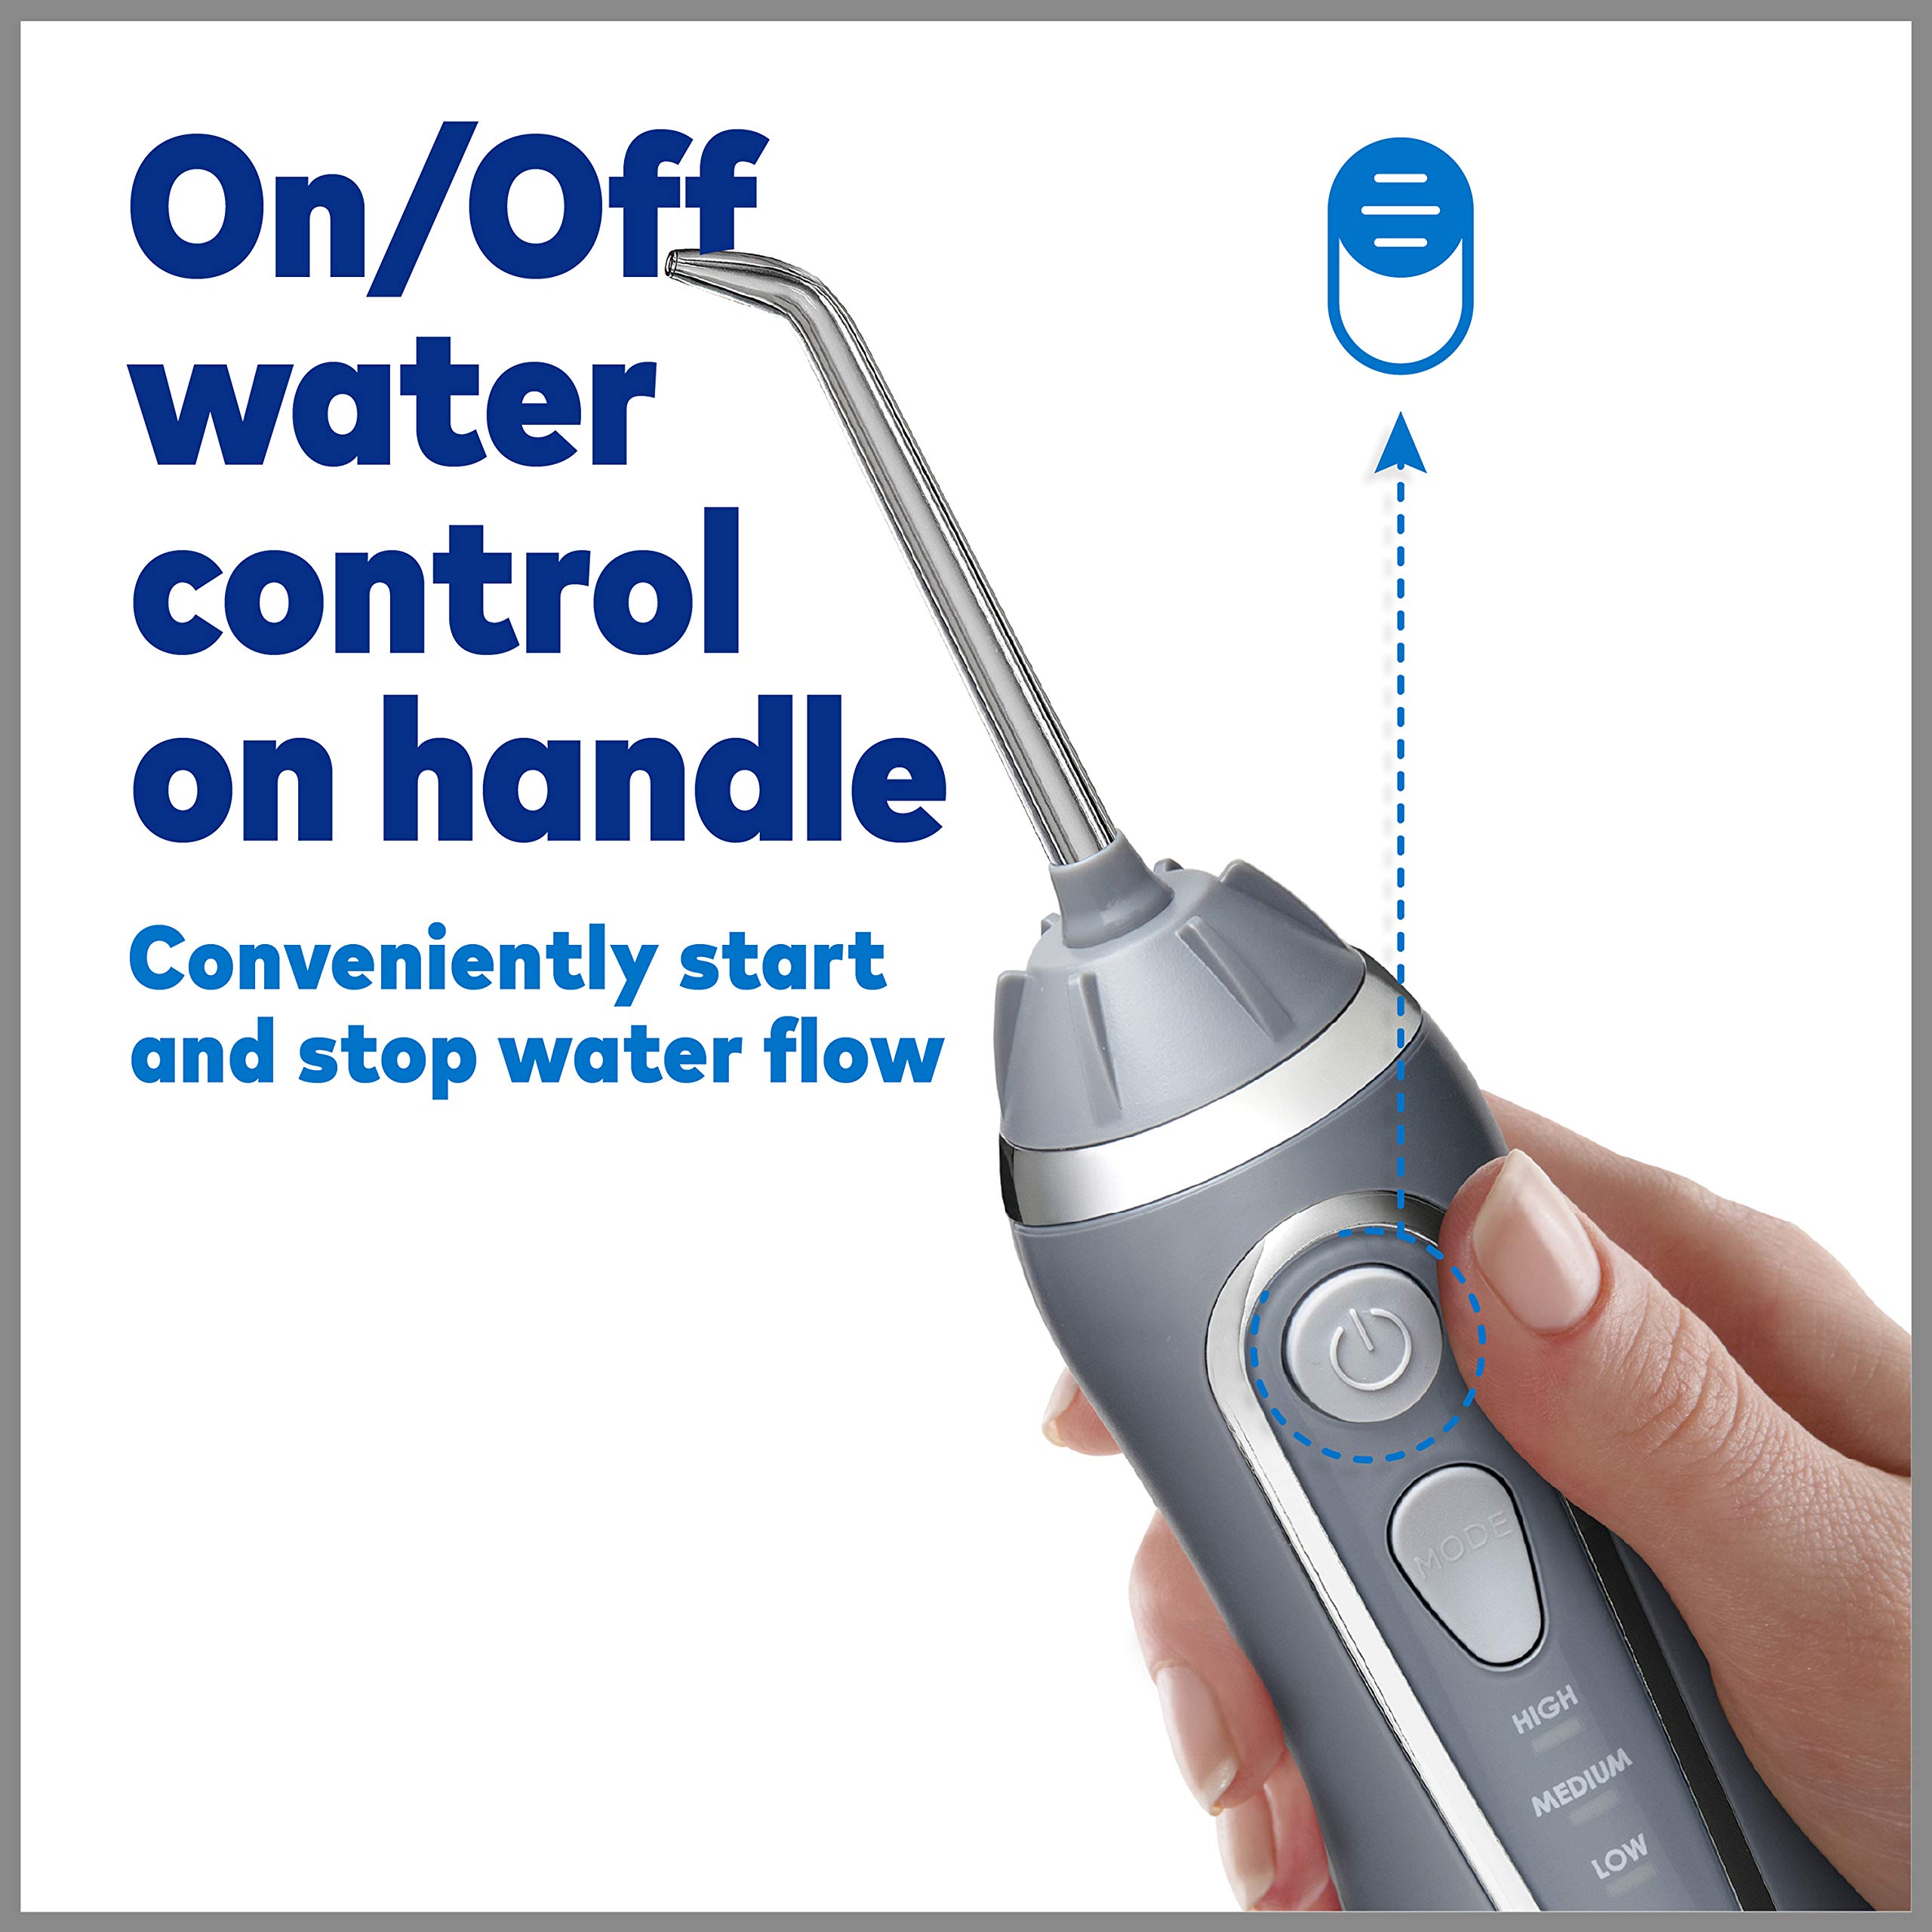 Waterpik Cordless Advanced Water Flosser For Teeth, Gums, Braces, Dental Care With Travel Bag and 4 Tips, ADA Accepted, Rechargeable, Portable, and Waterproof, Gray WP-587